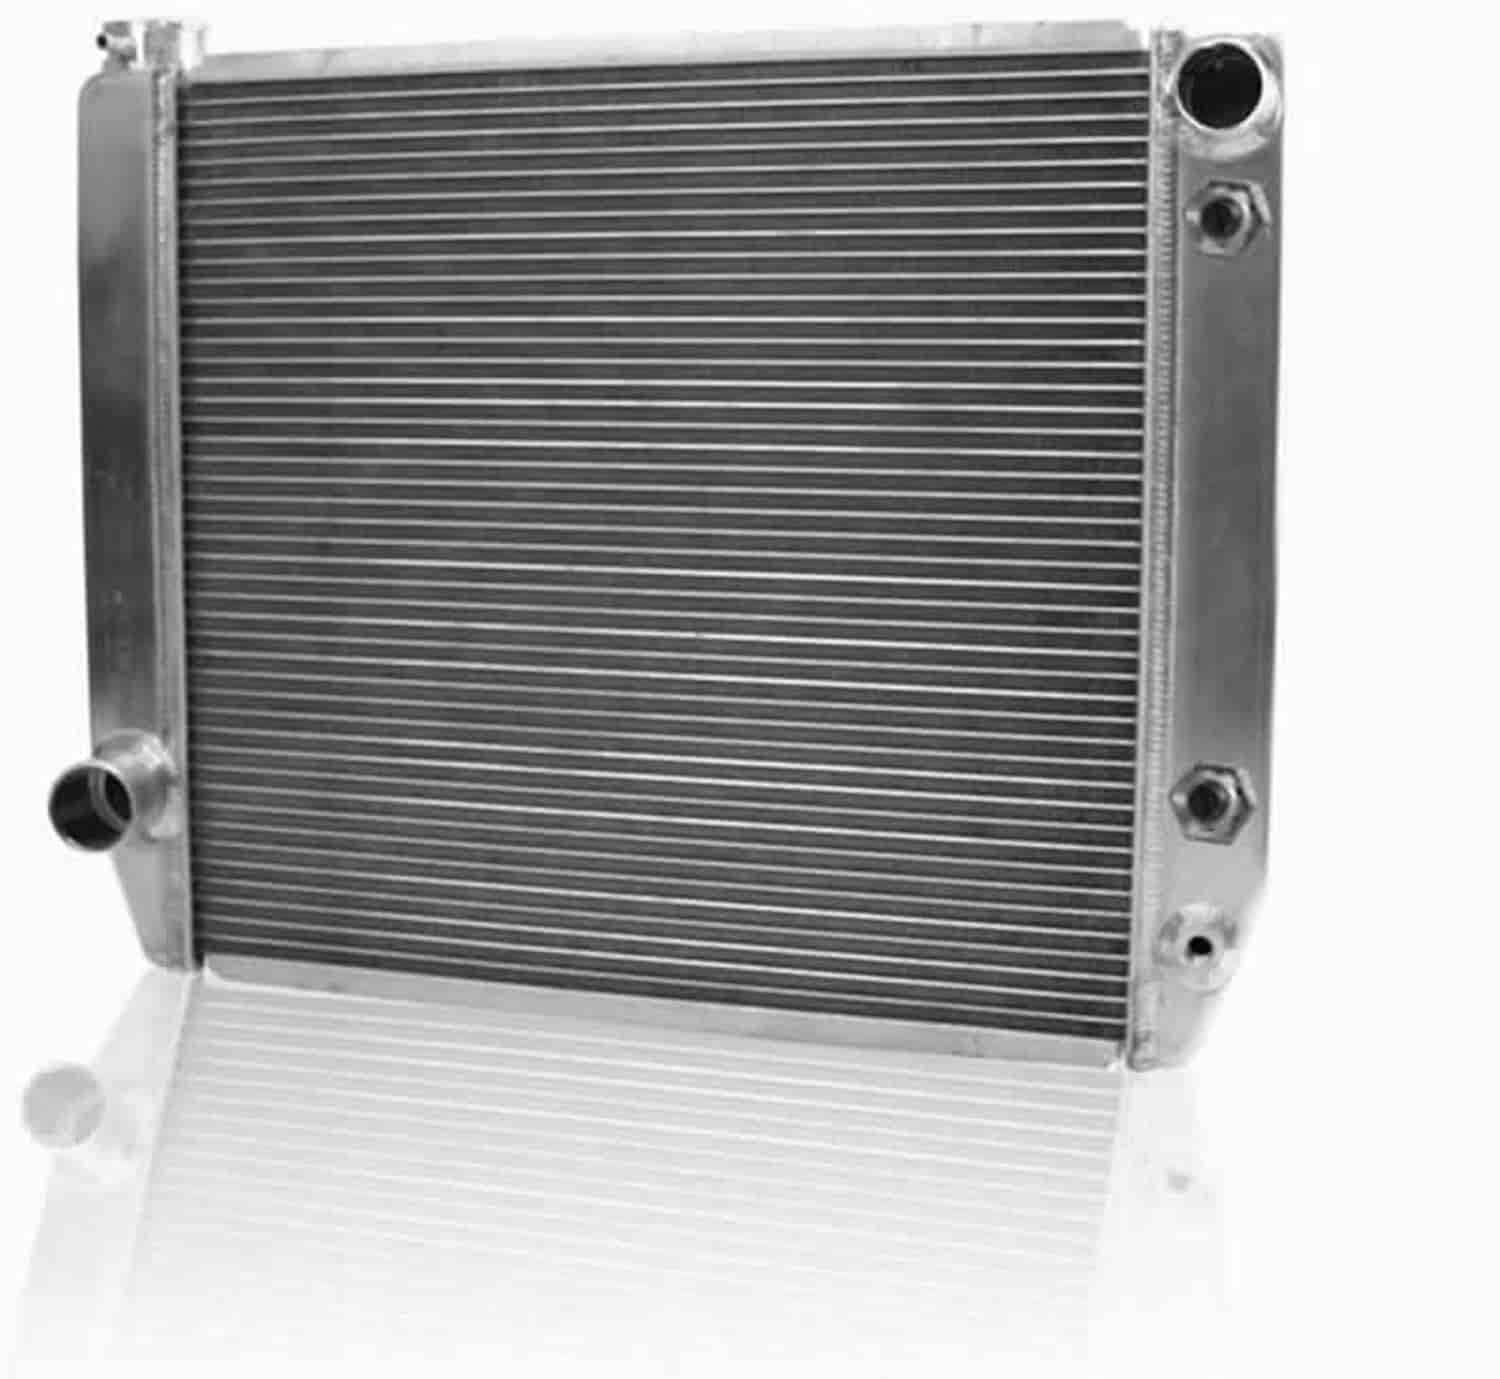 ClassicCool Universal Fit Radiator Single Pass Crossflow Design 24" x 19" with Transmission Cooler